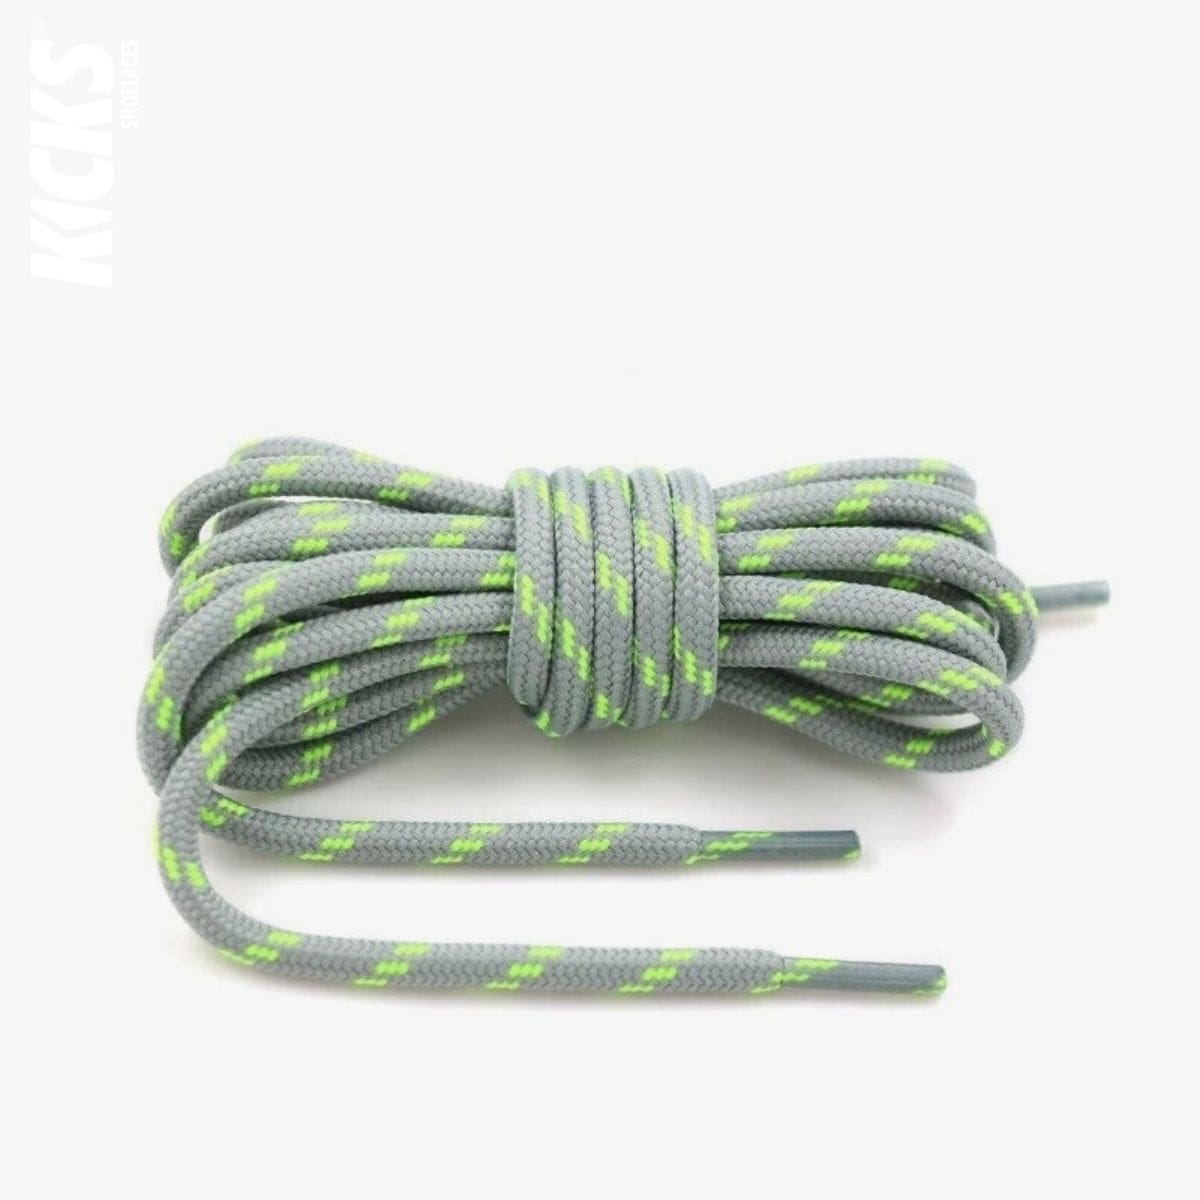 trekking-shoe-laces-united-states-in-light-grey-and-green-shop-online